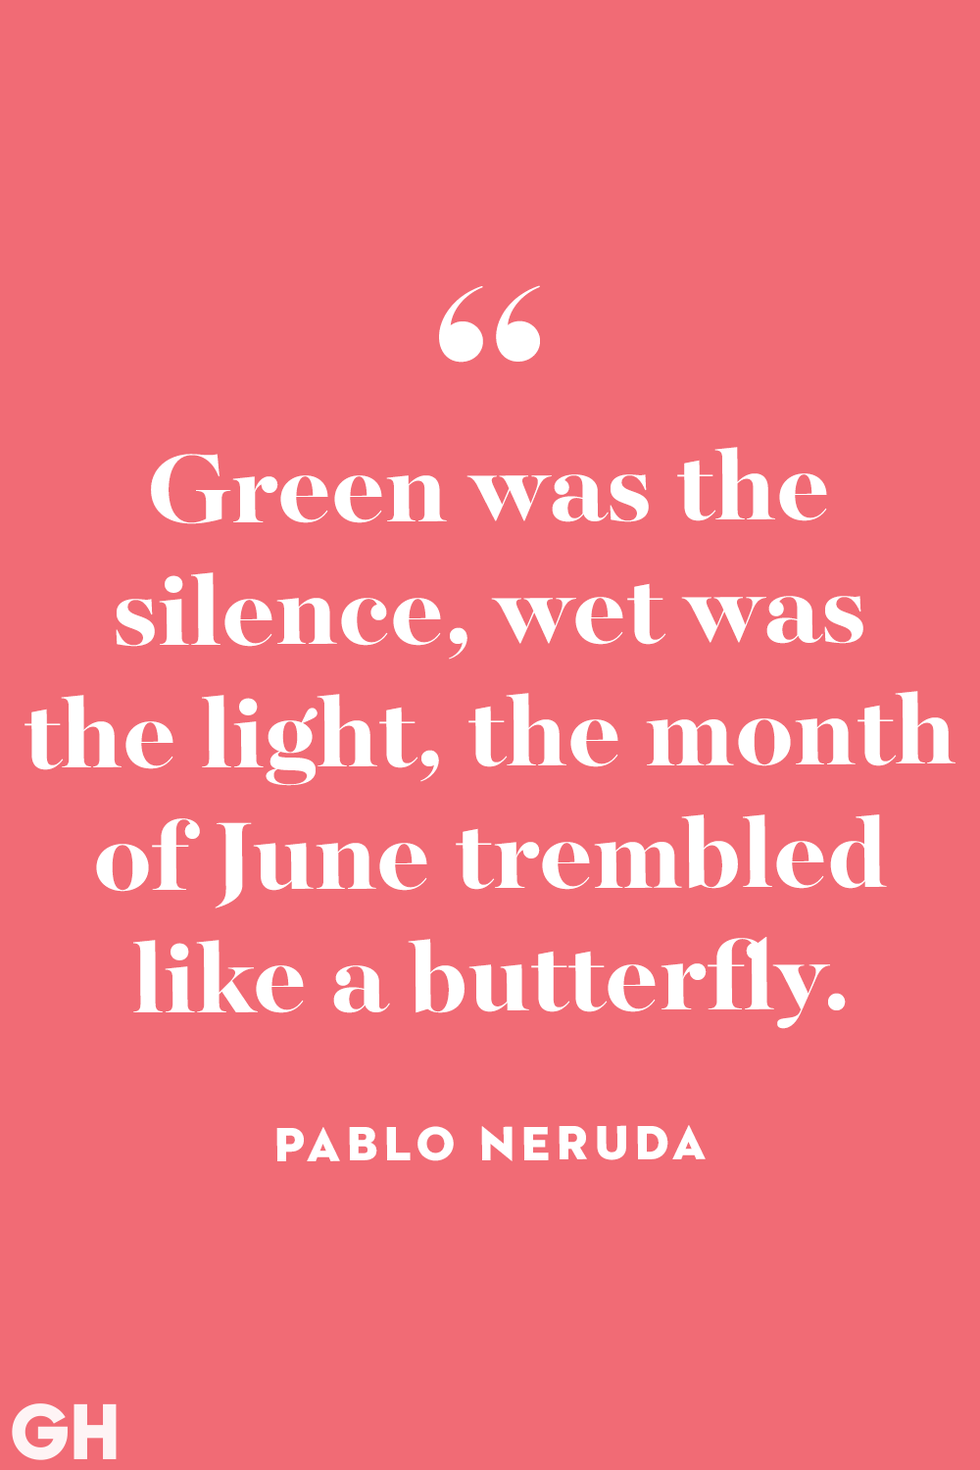 quote about summer by pablo neruda